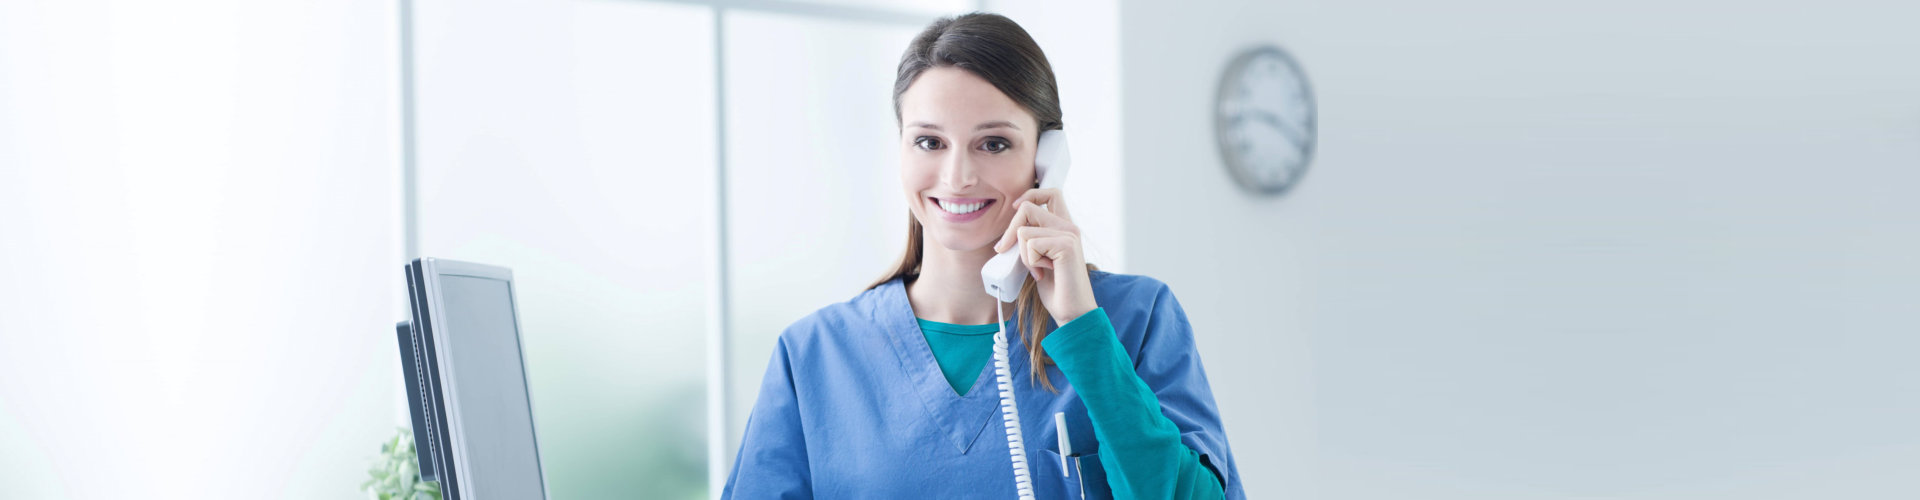 nurse smiling while on the phone